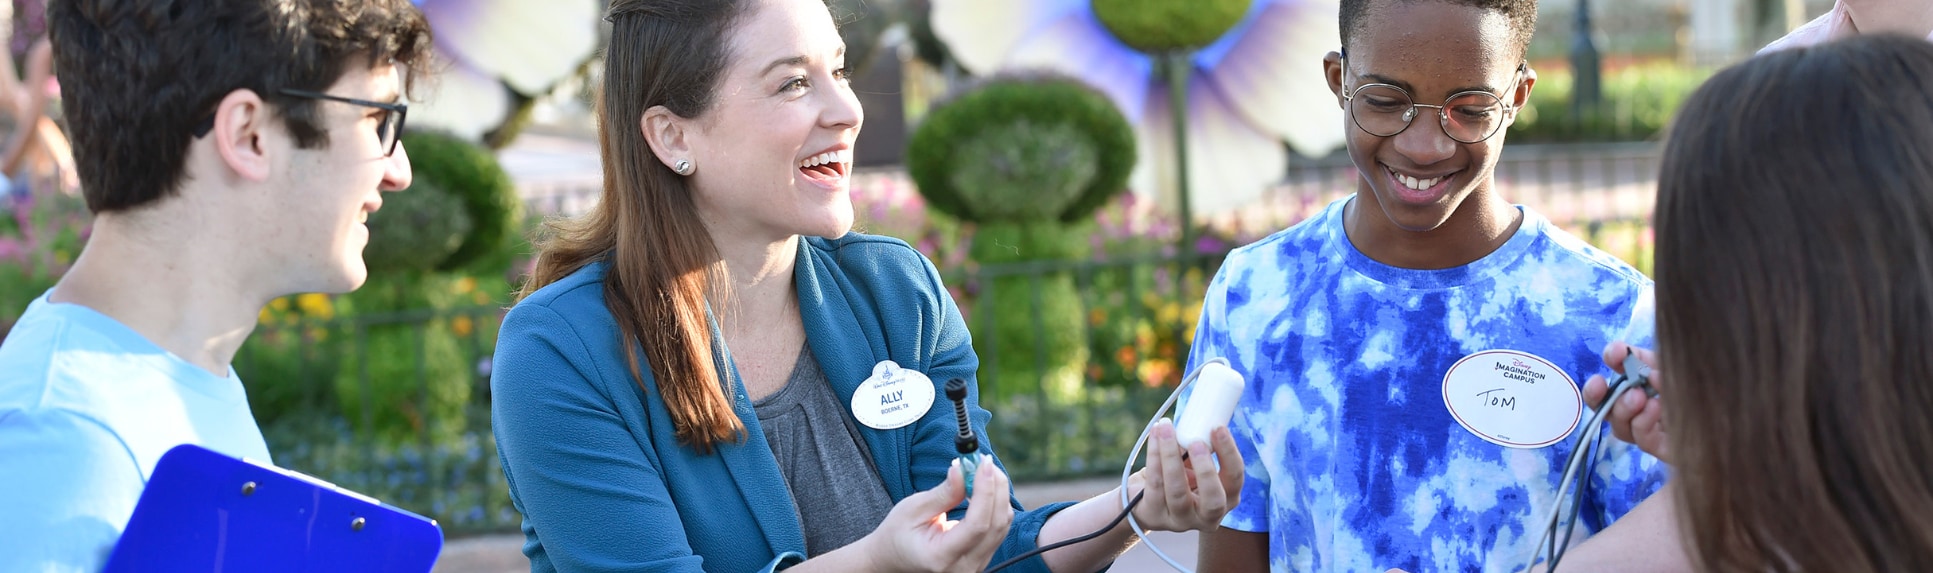 A Cast Member holding wires and equipment talks to 2 Disney Imagination Campus students